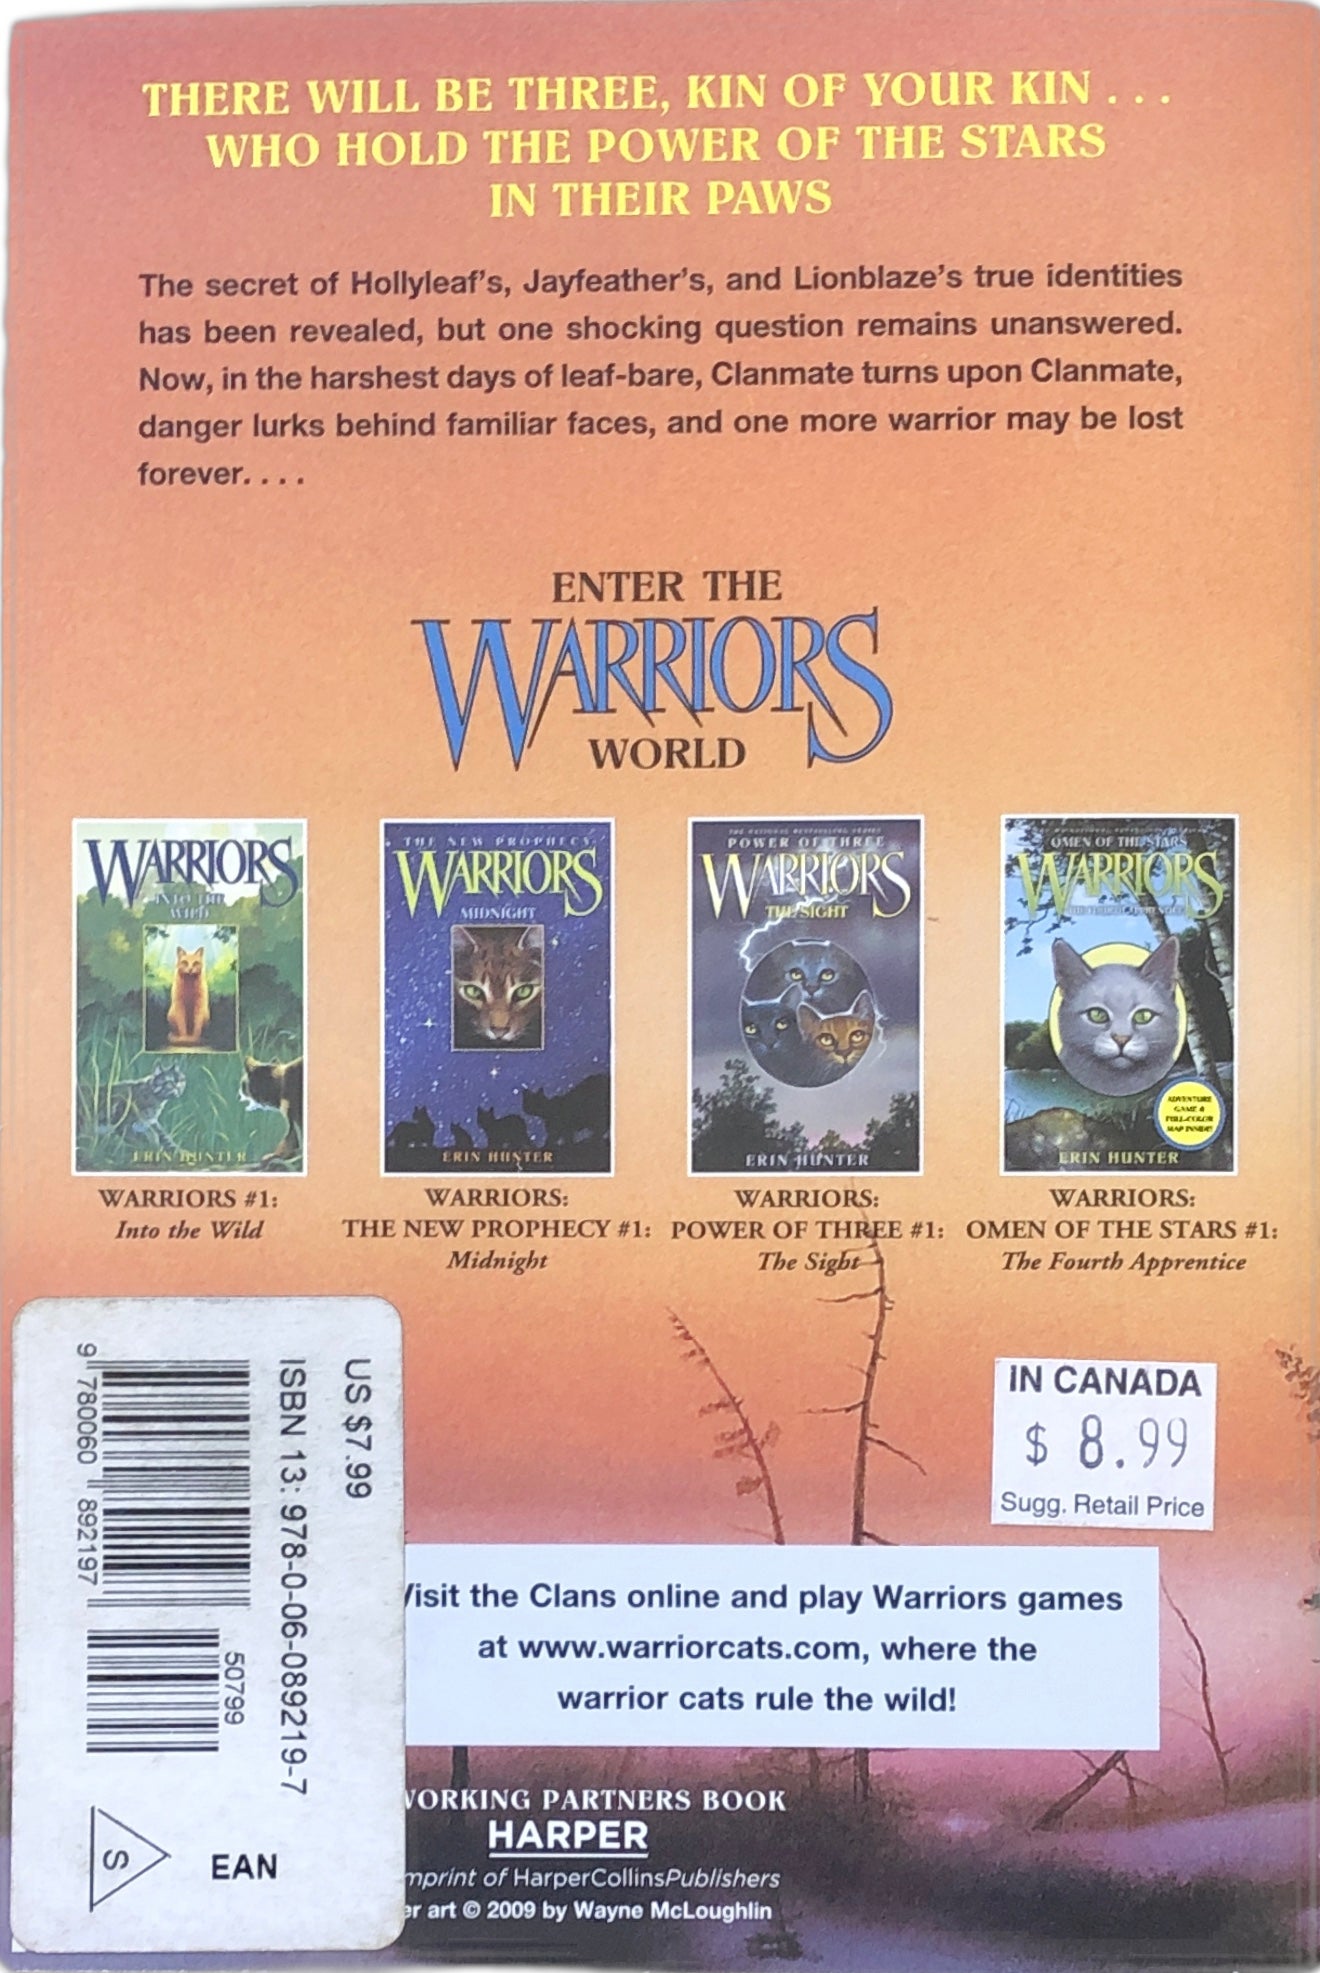 Warriors: Power of Three Collection by Erin Hunter 6 Books